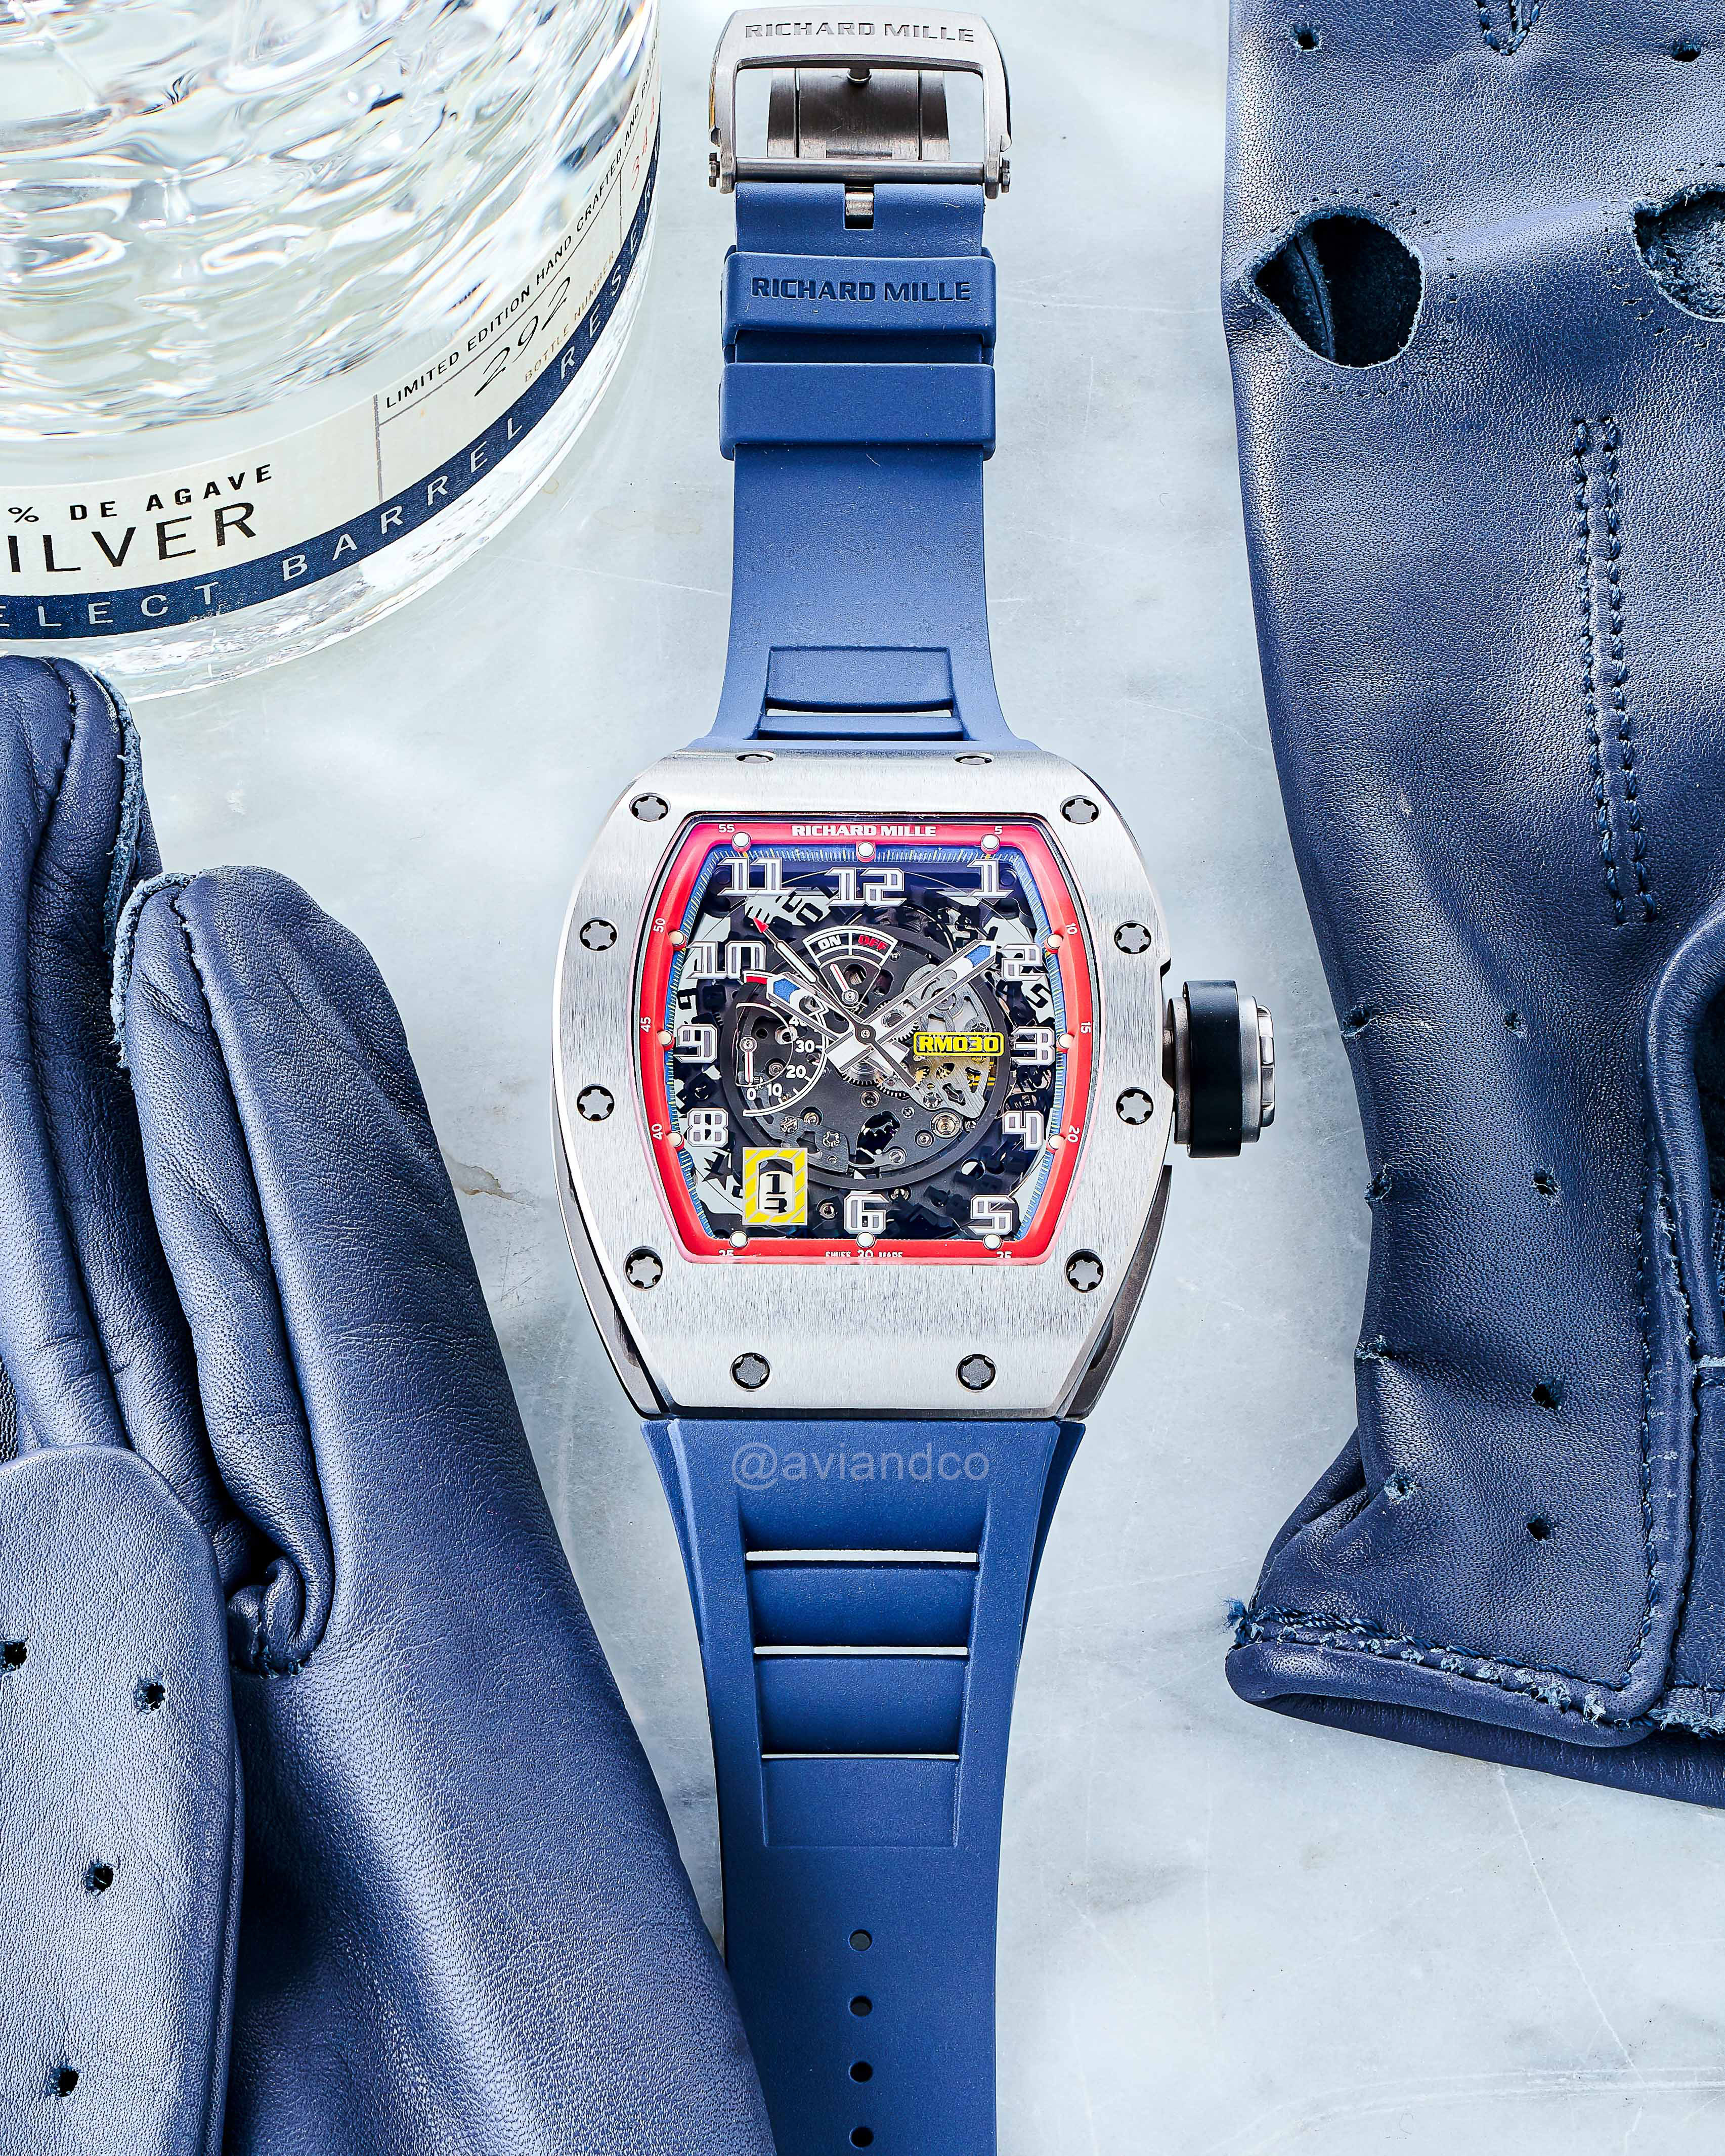 Stainless Steel Bezel with Skeleton Dial and Blue Rubber on a White Marble Tabletop Surrounded by a Bottle of Gin and a Pair of Blue Leather Gloves